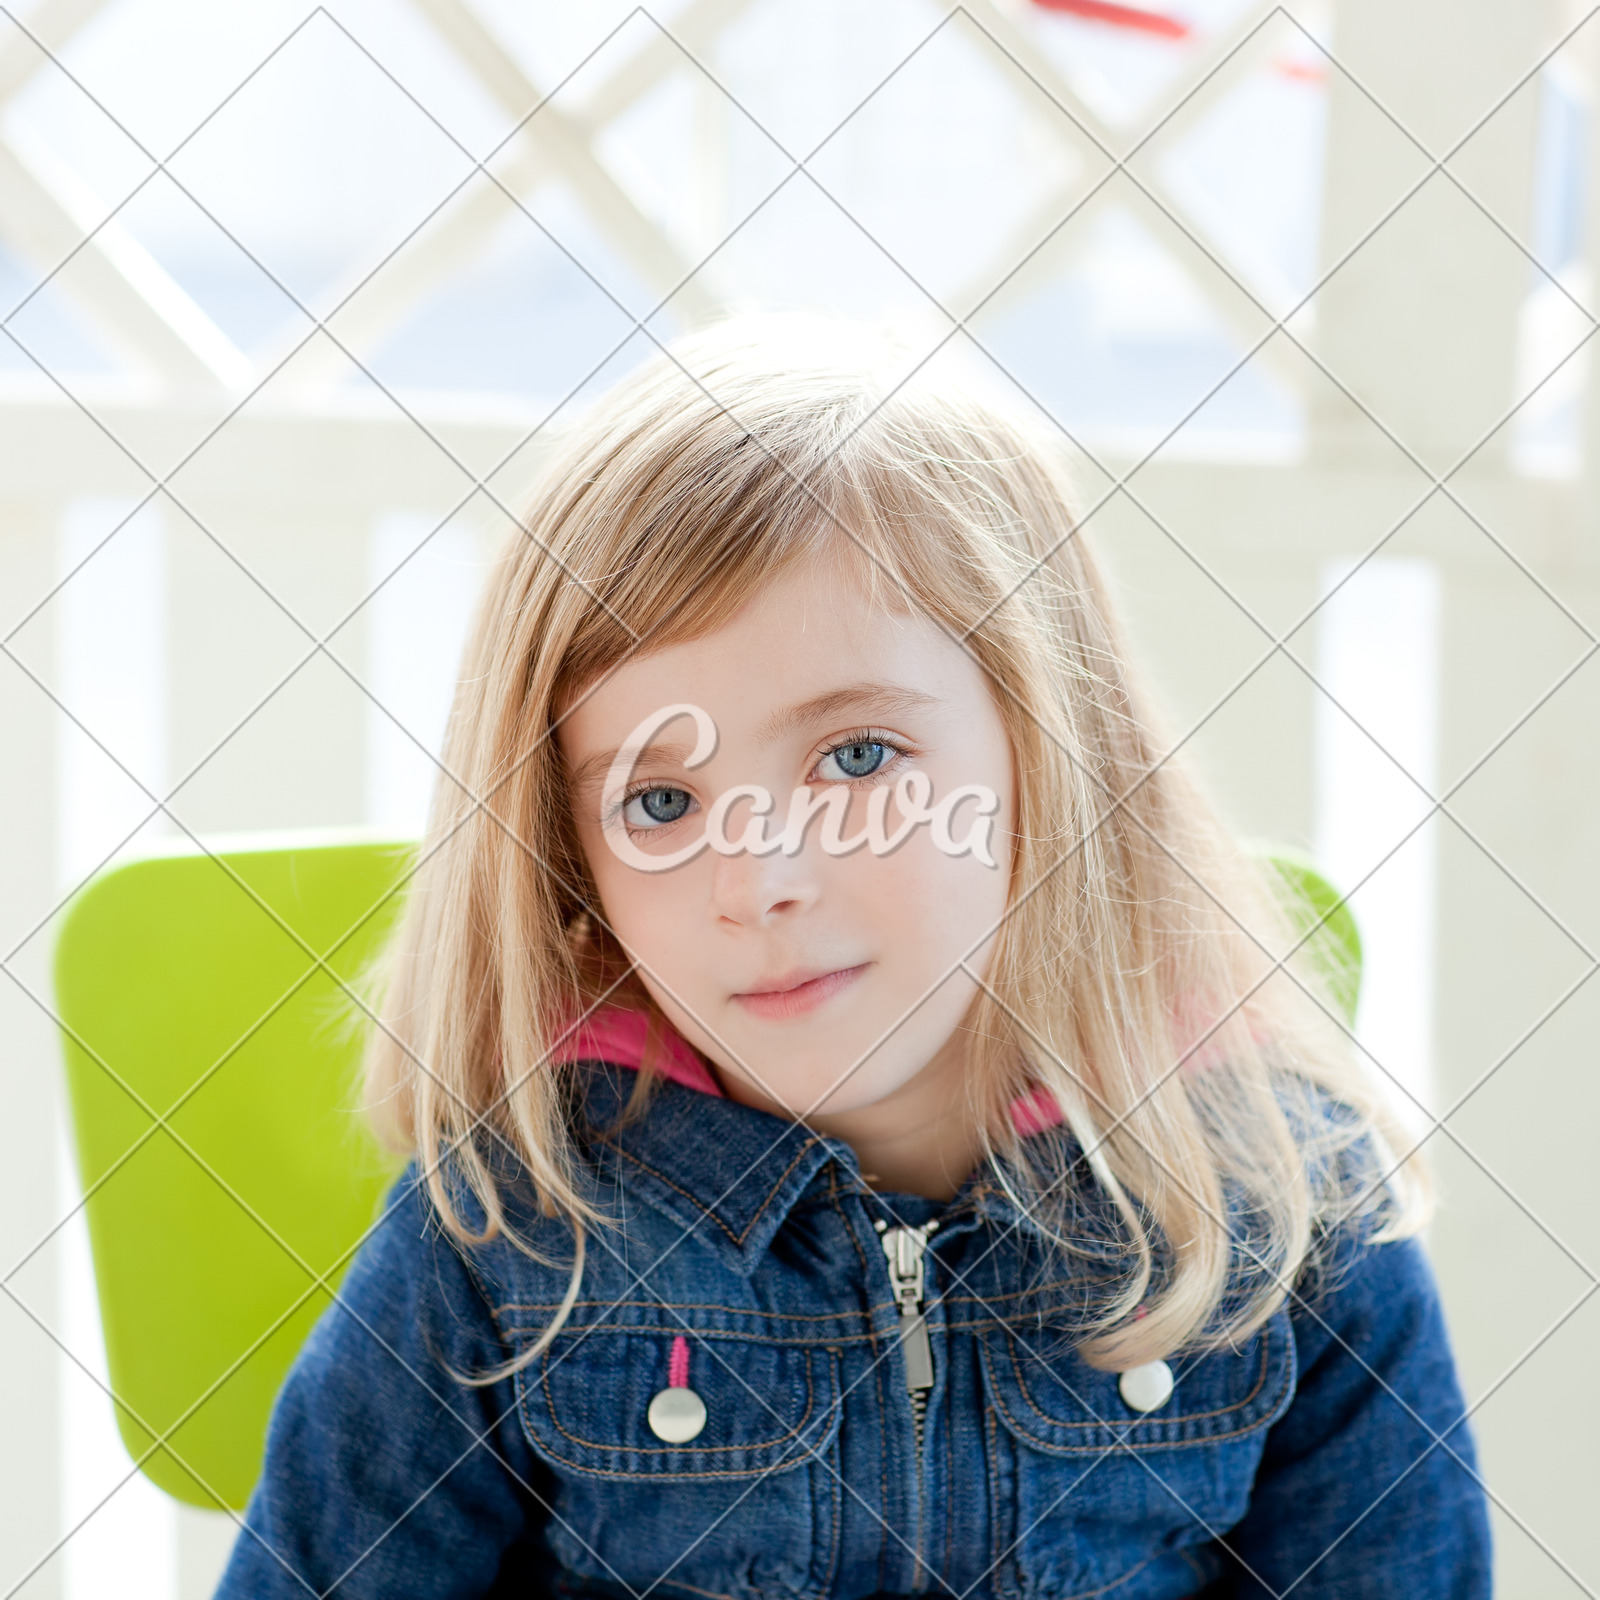 Blue Eyes Kid Girl Portrait Outdoor Sit In Chair Photos By Canva